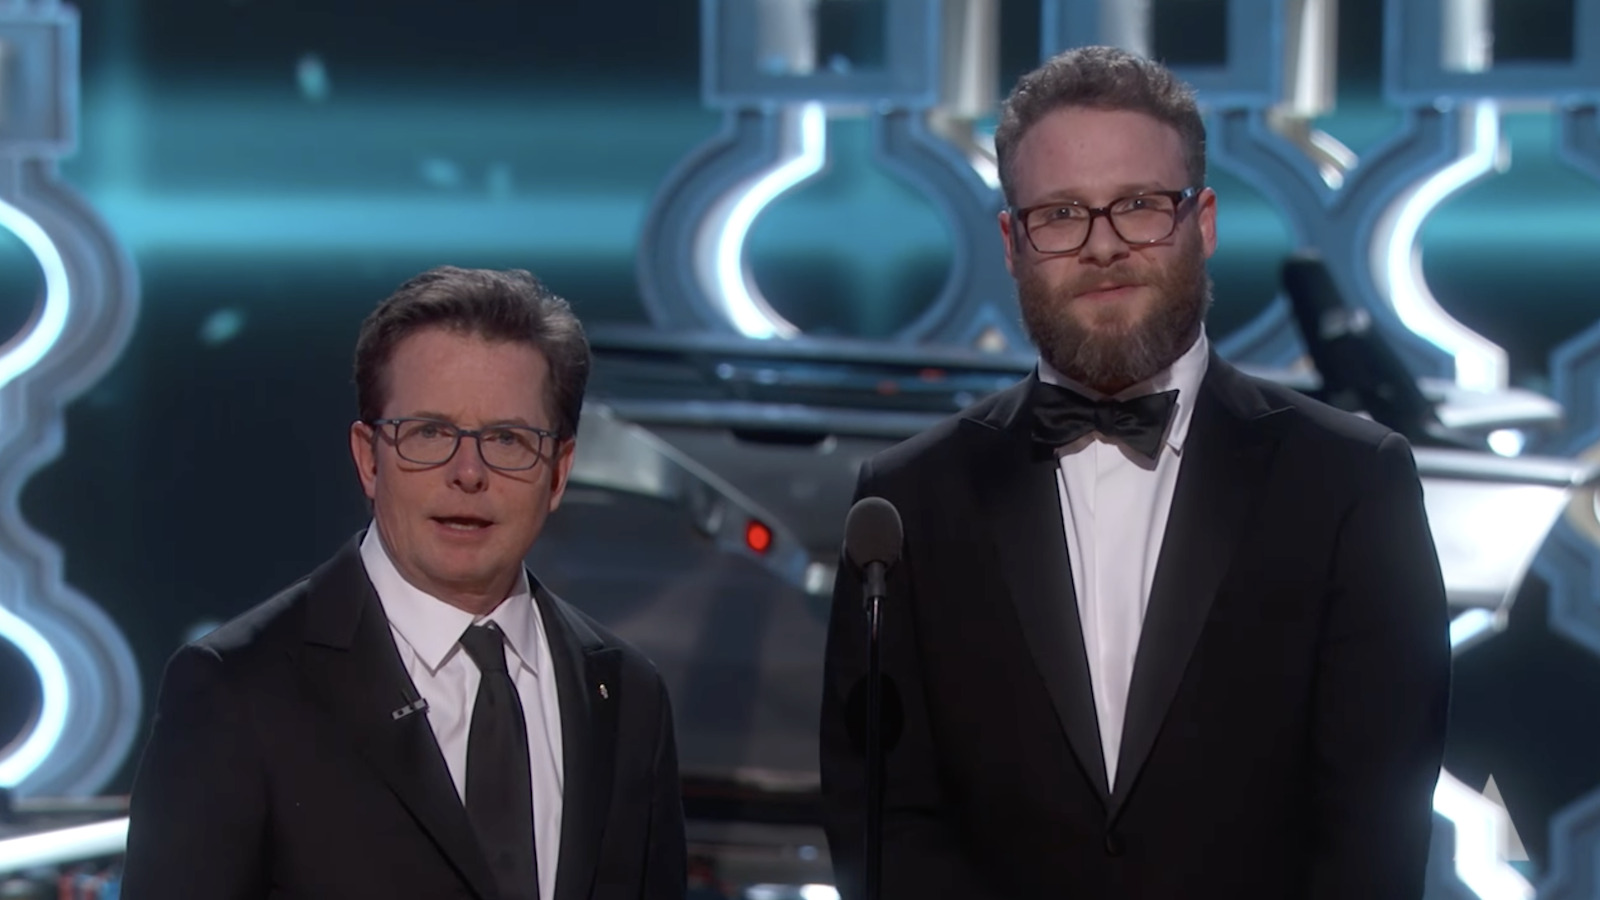 Seth Rogen and Michael J. Fox present the Academy Award for Film Editing at the 2017 Oscars